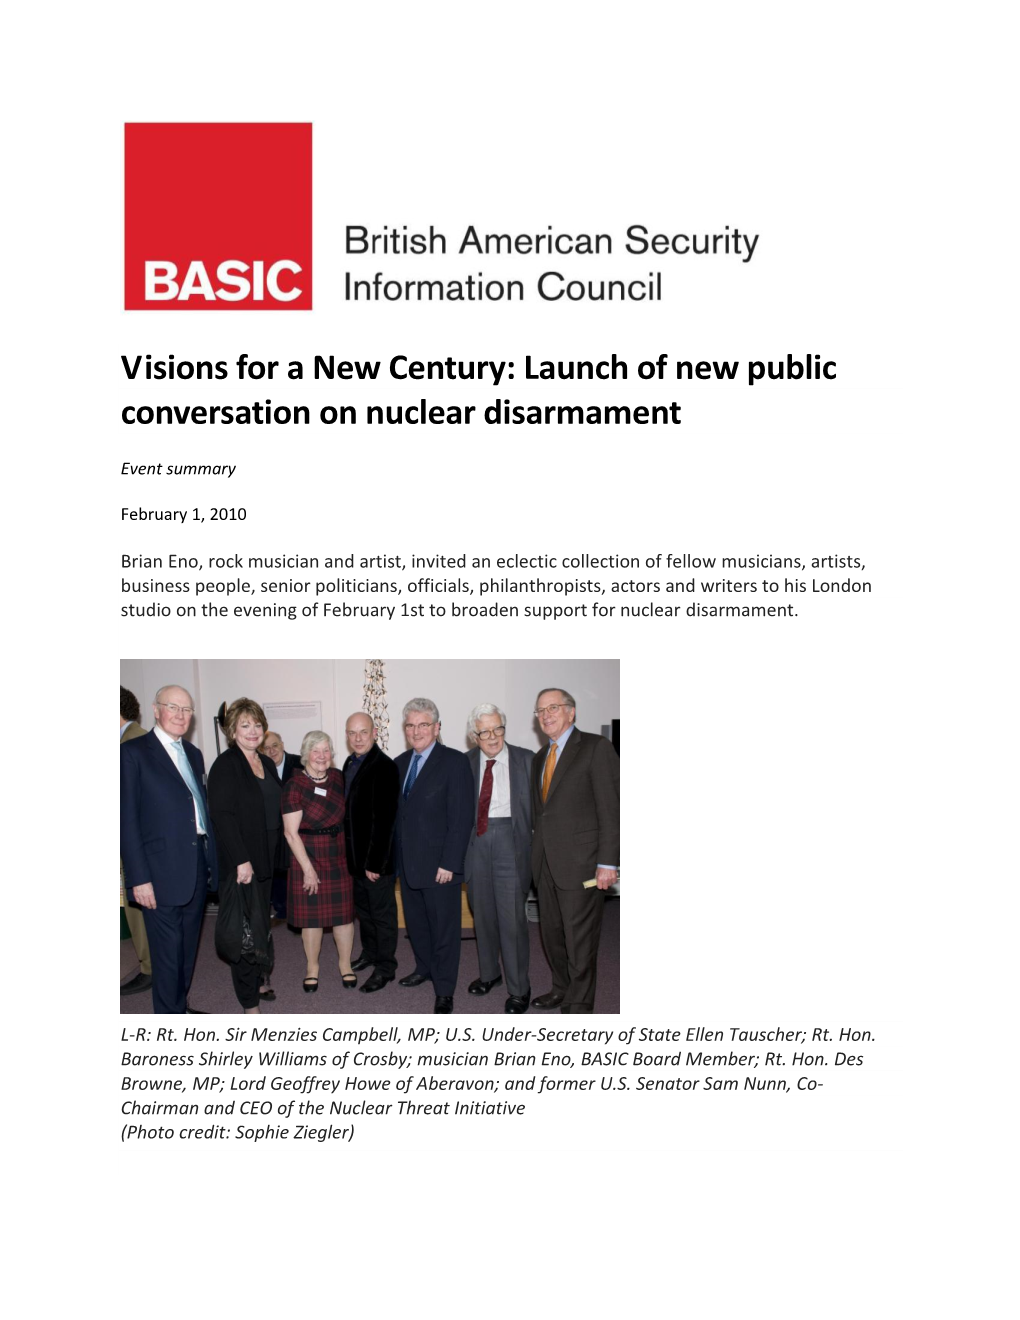 Visions for a New Century: Launch of New Public Conversation on Nuclear Disarmament